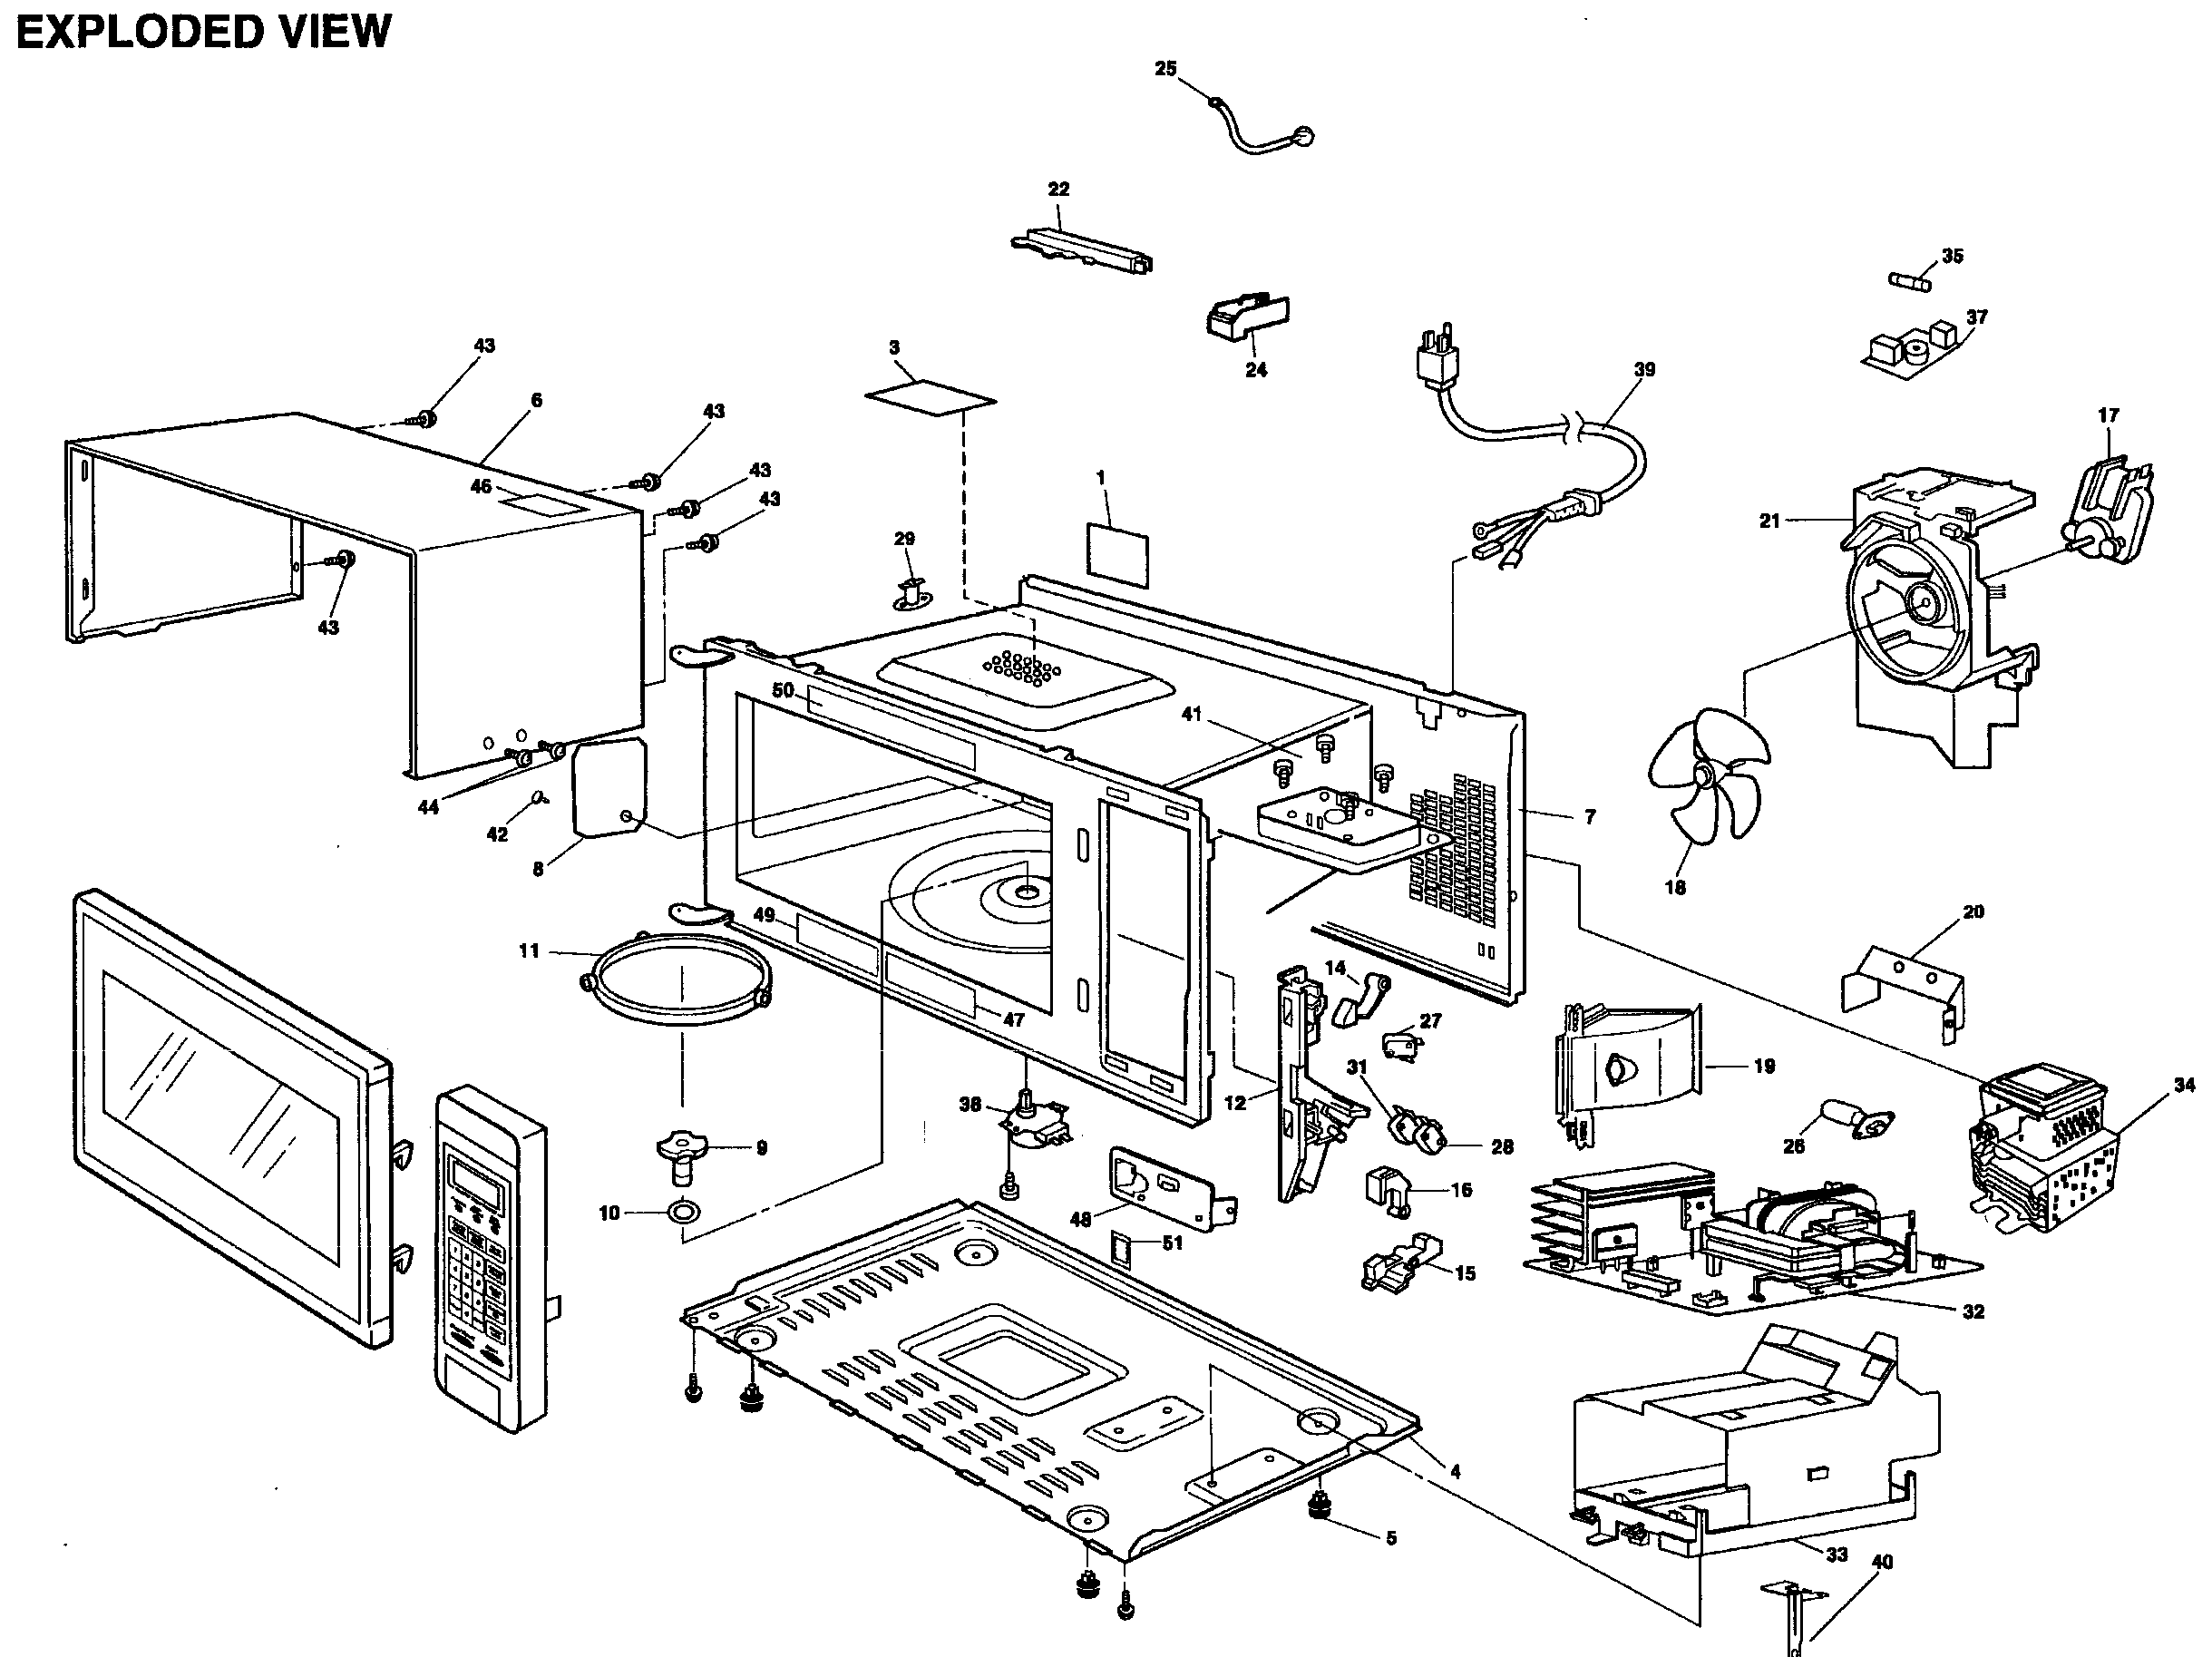 EXPLODED VIEW Diagram & Parts List for Model NNSD997S Panasonic-Parts